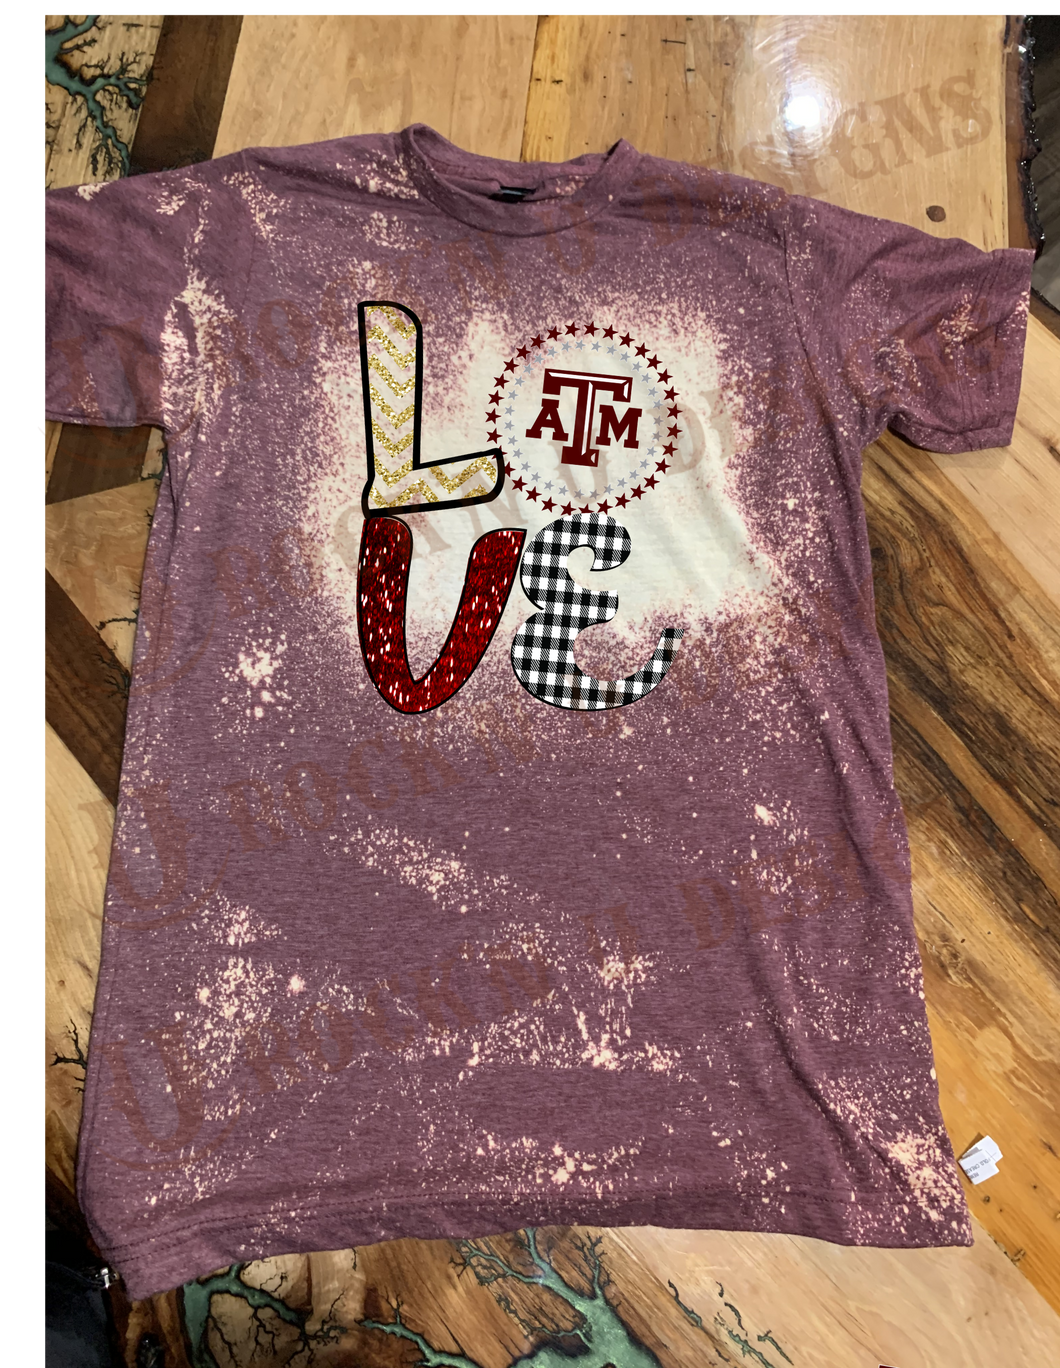 FOR THE LOVE OF A&M Bleached Custom Unisex T-shirt